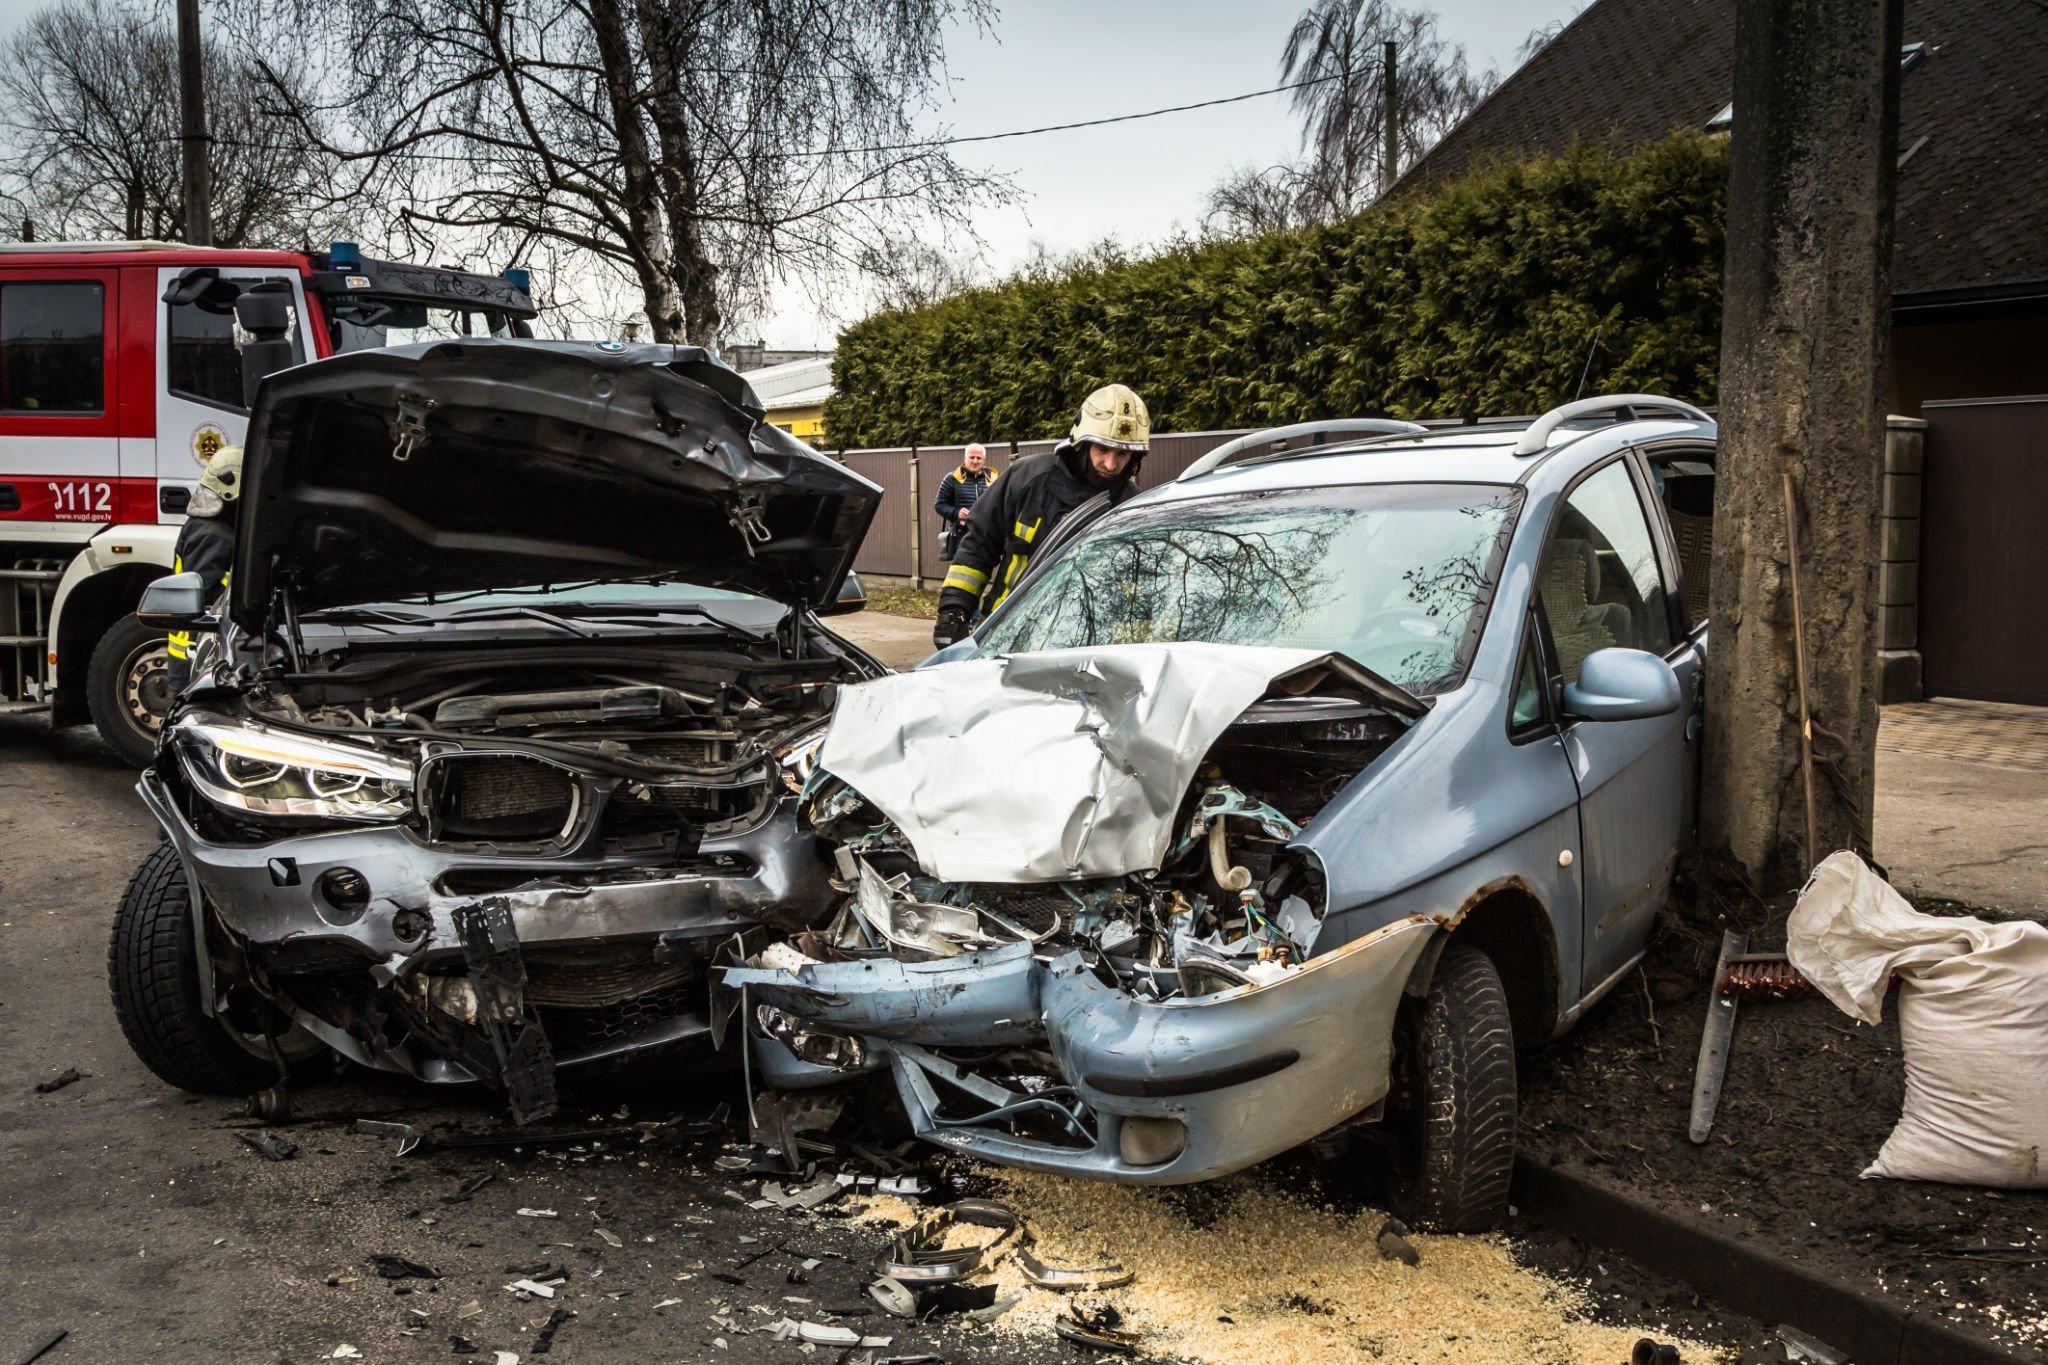 Eyewitnesses importance for Your Auto Accident Claim